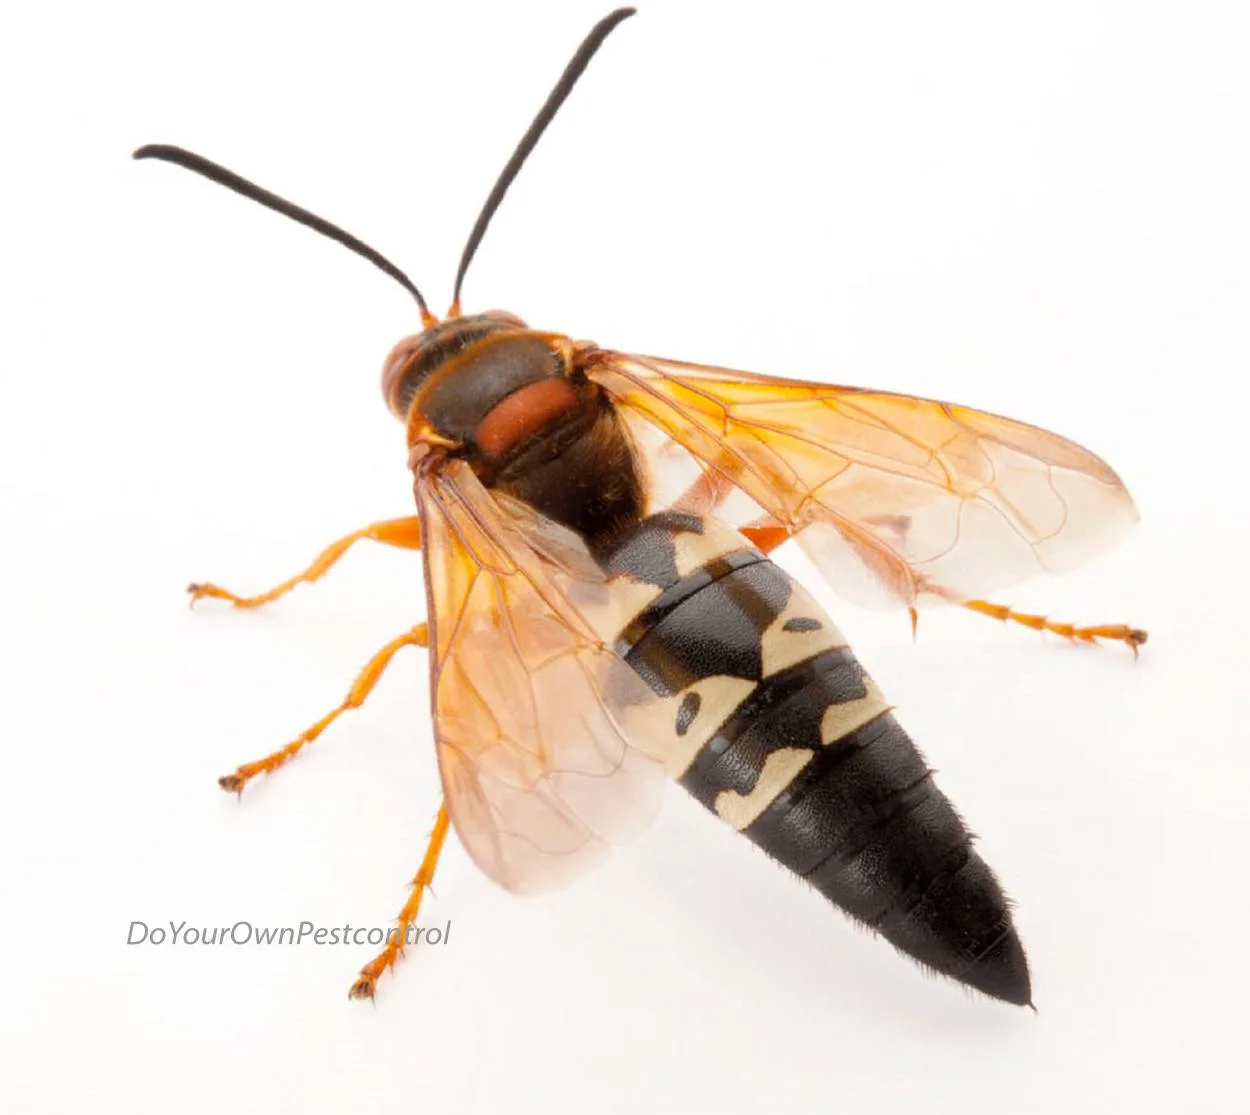 An image of a cicada killer on a white background.